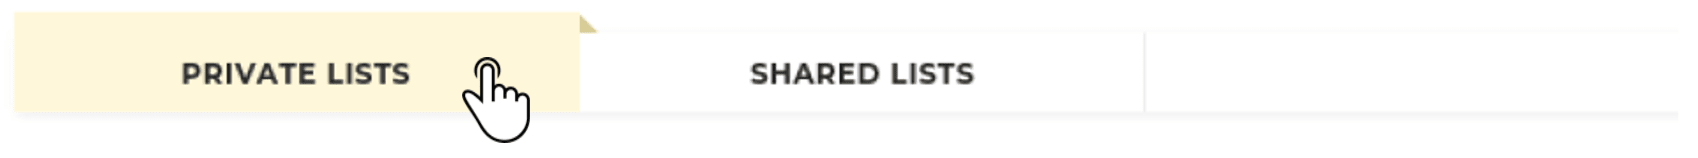 Select Private List or Shared List